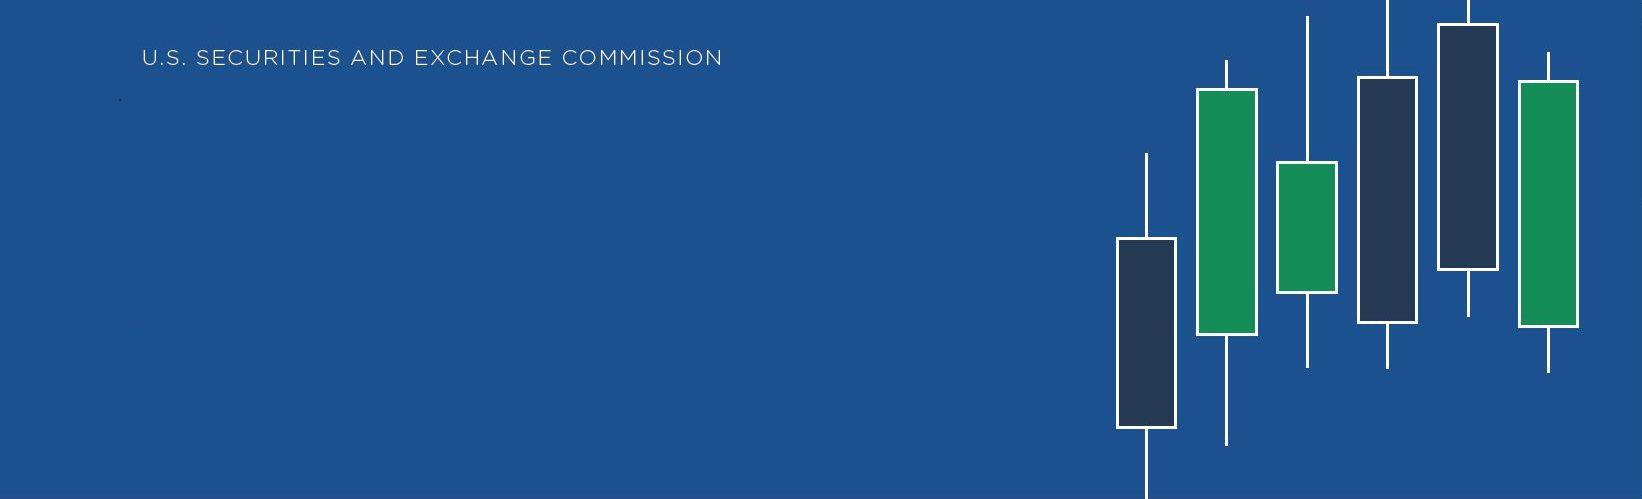 U.S. Securities and Exchange Commission header graphic